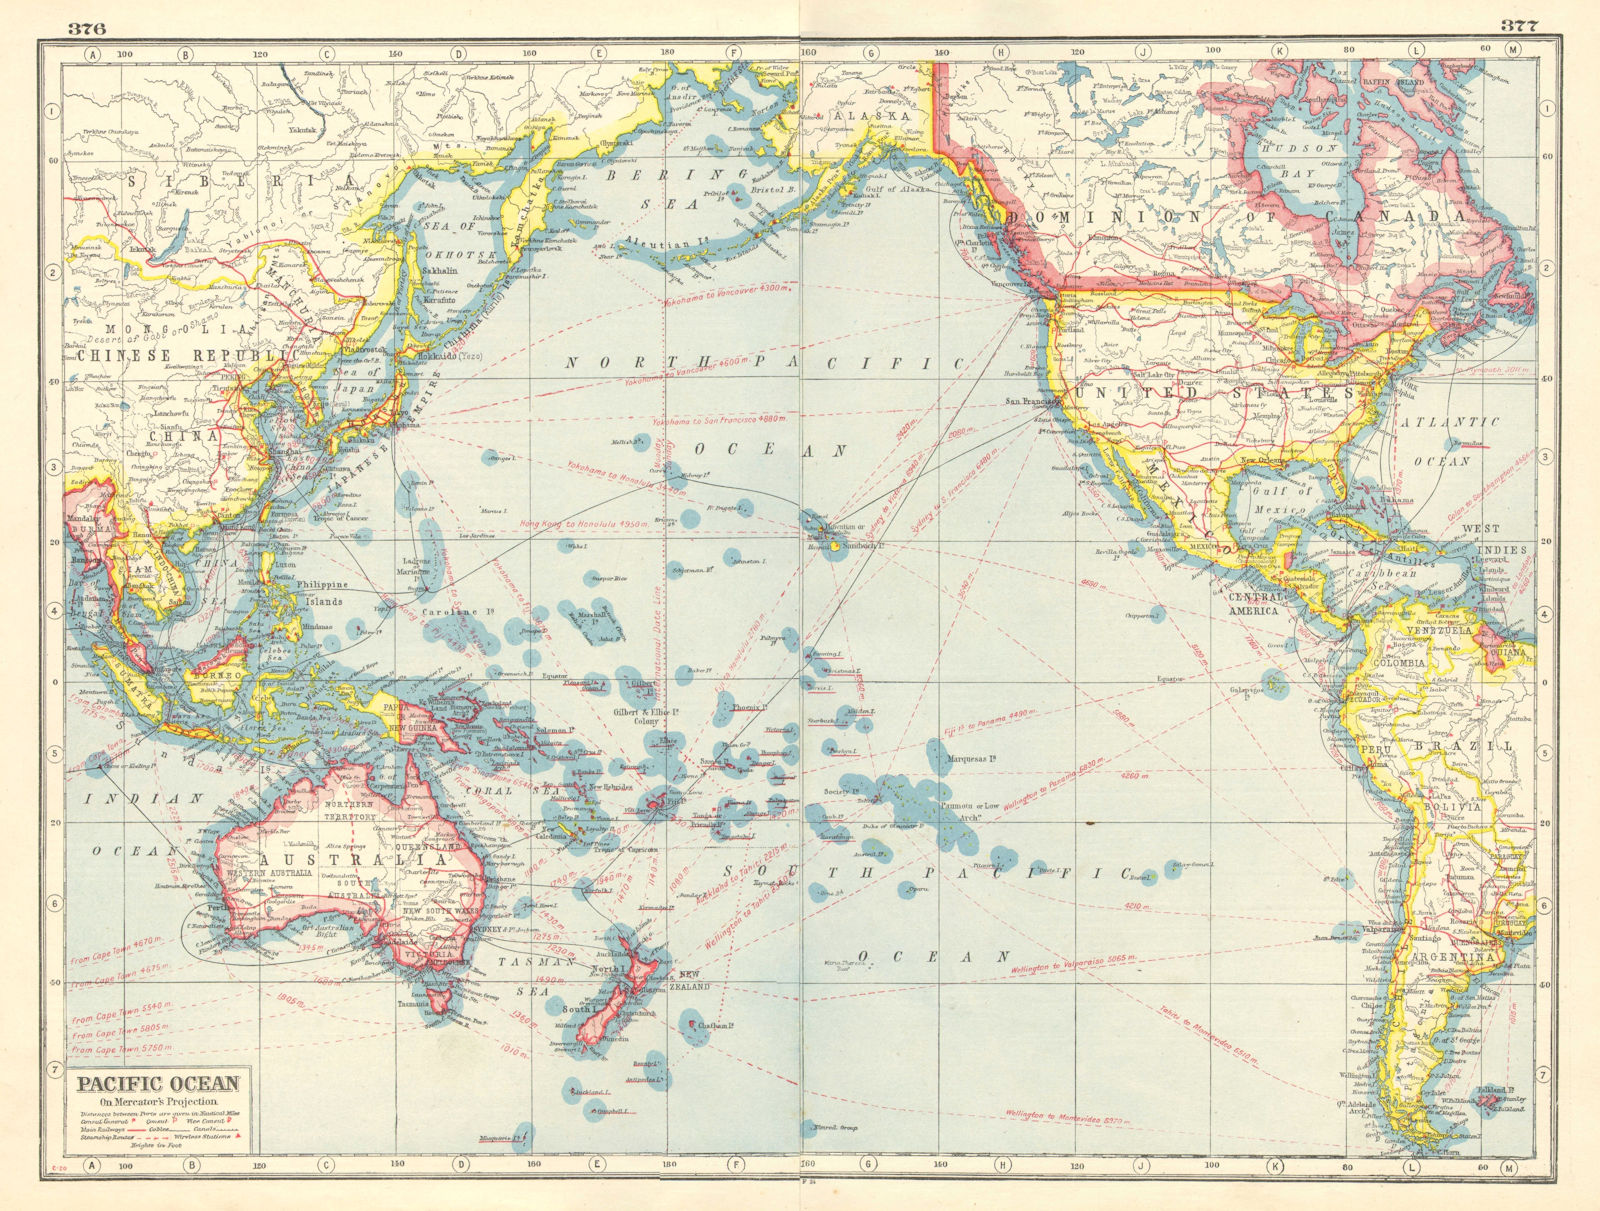 Associate Product PACIFIC OCEAN. Mercator Projection. Railways cables steamship routes 1920 map